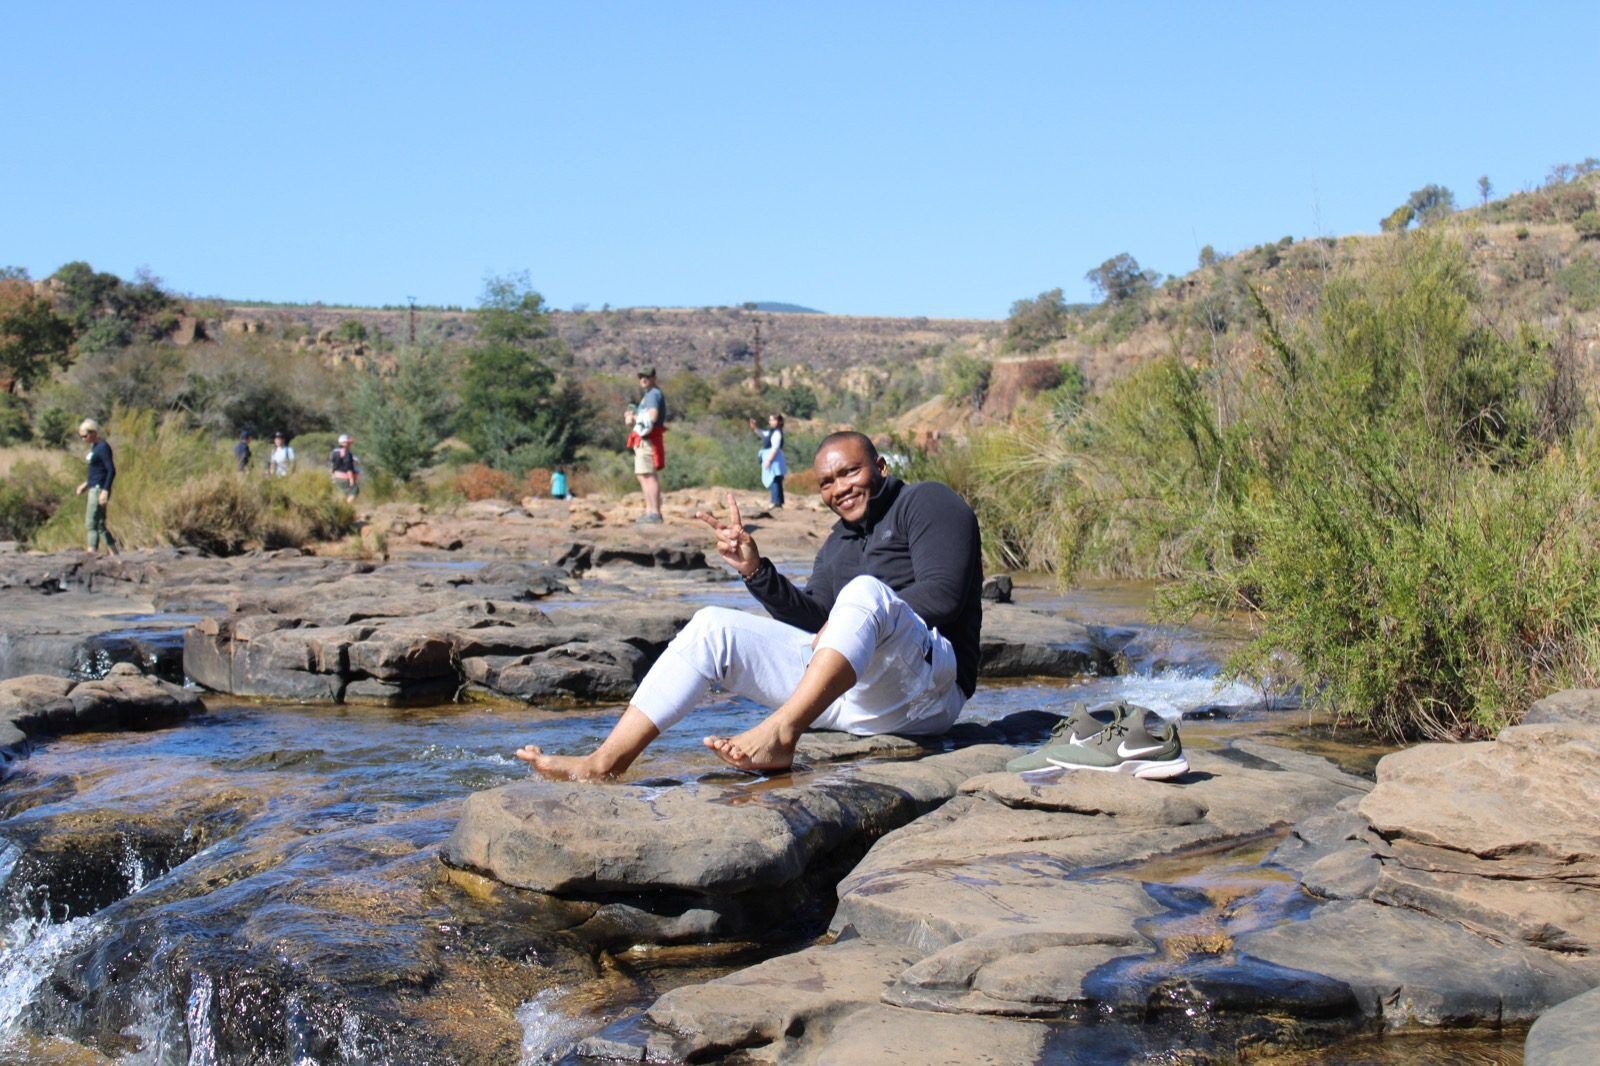 A man sitting on top of rocks in the water.